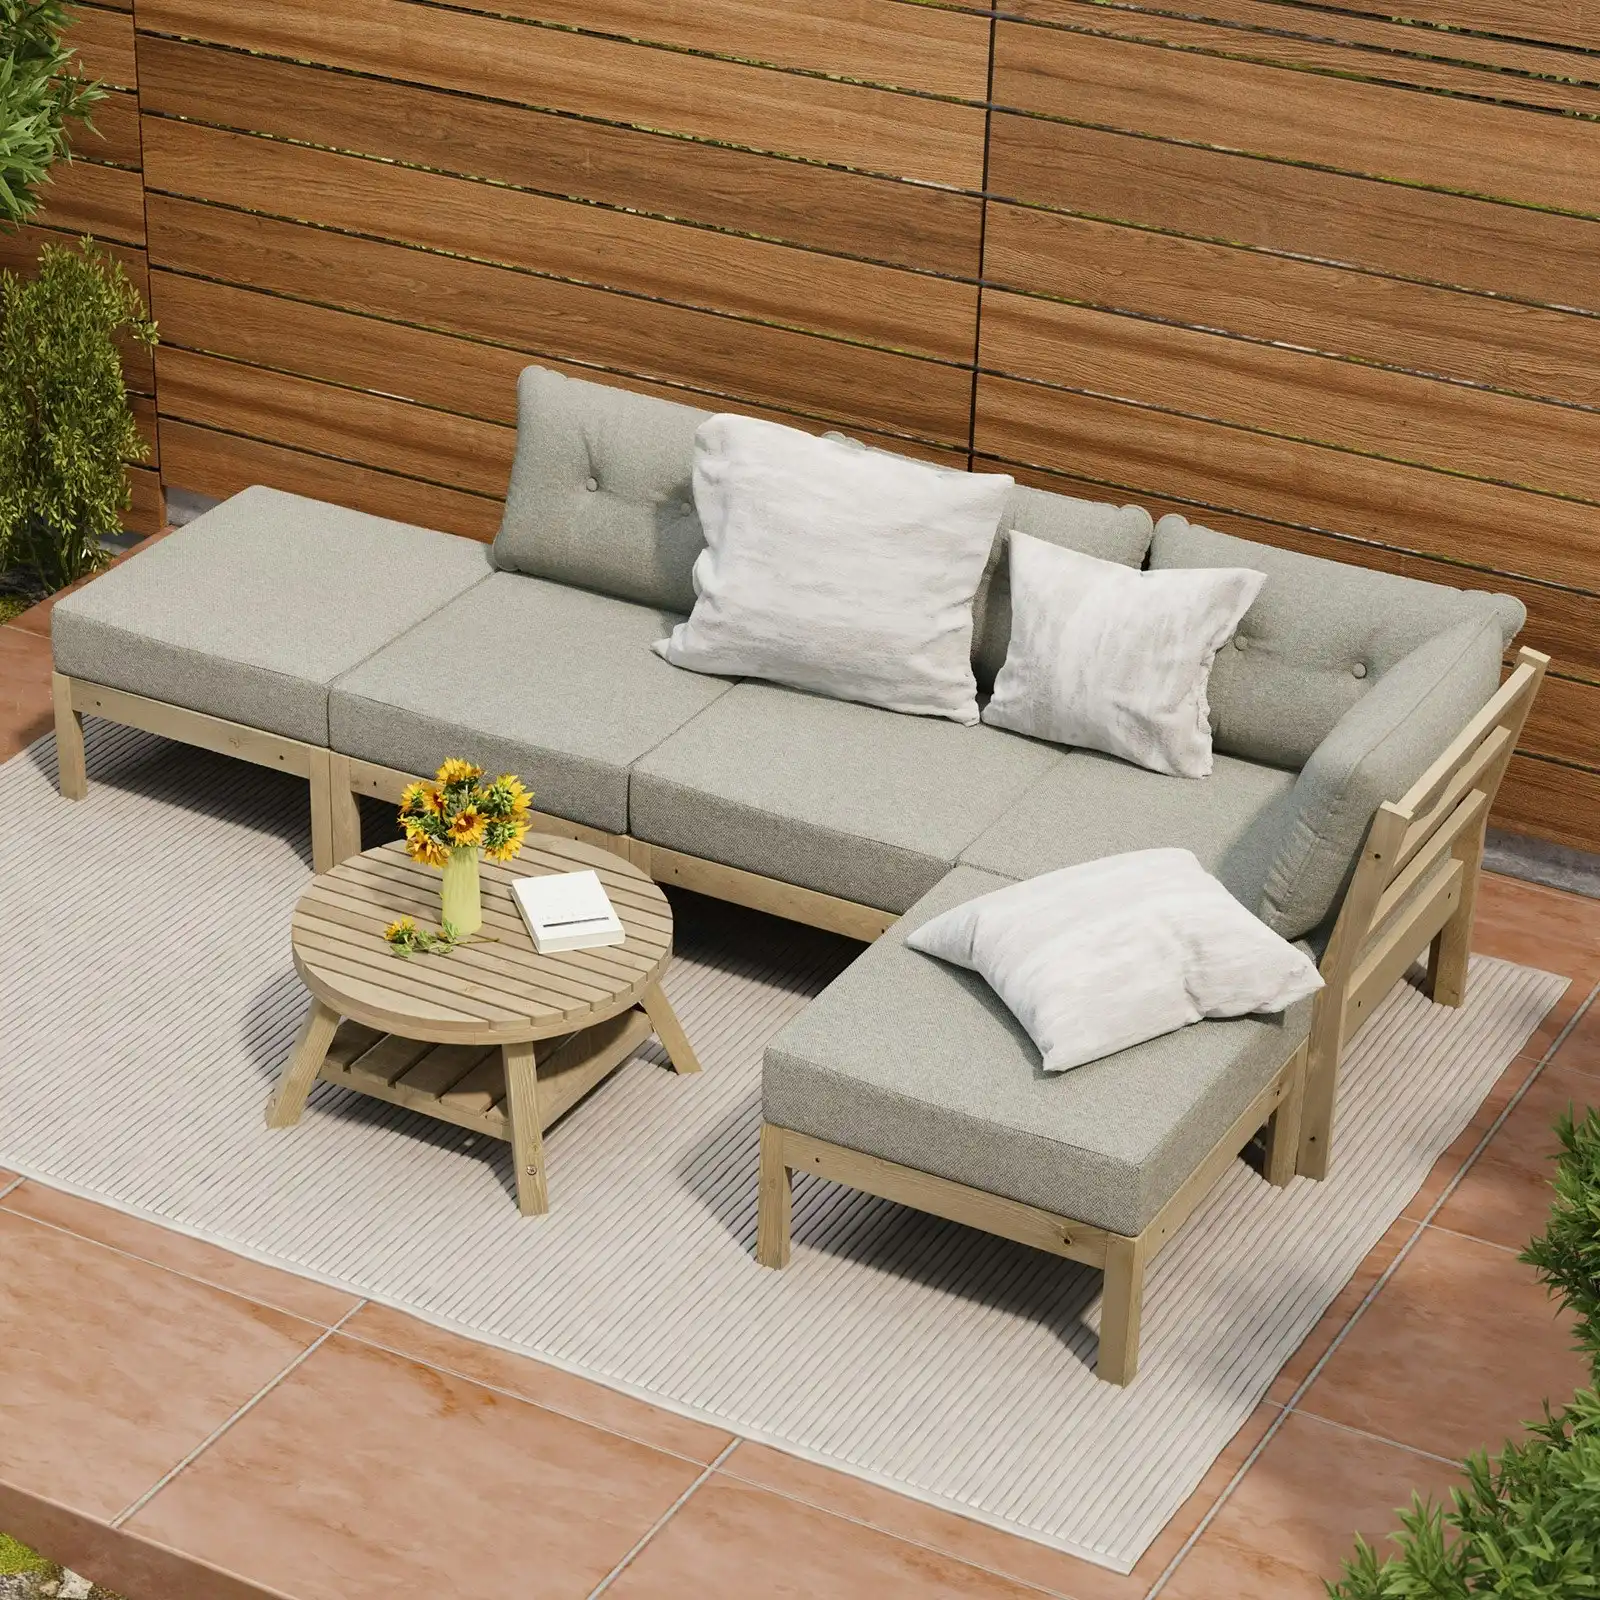 Livsip Outdoor Lounge Sofa Set 6 Piece Garden Furniture Dining Table Chairs